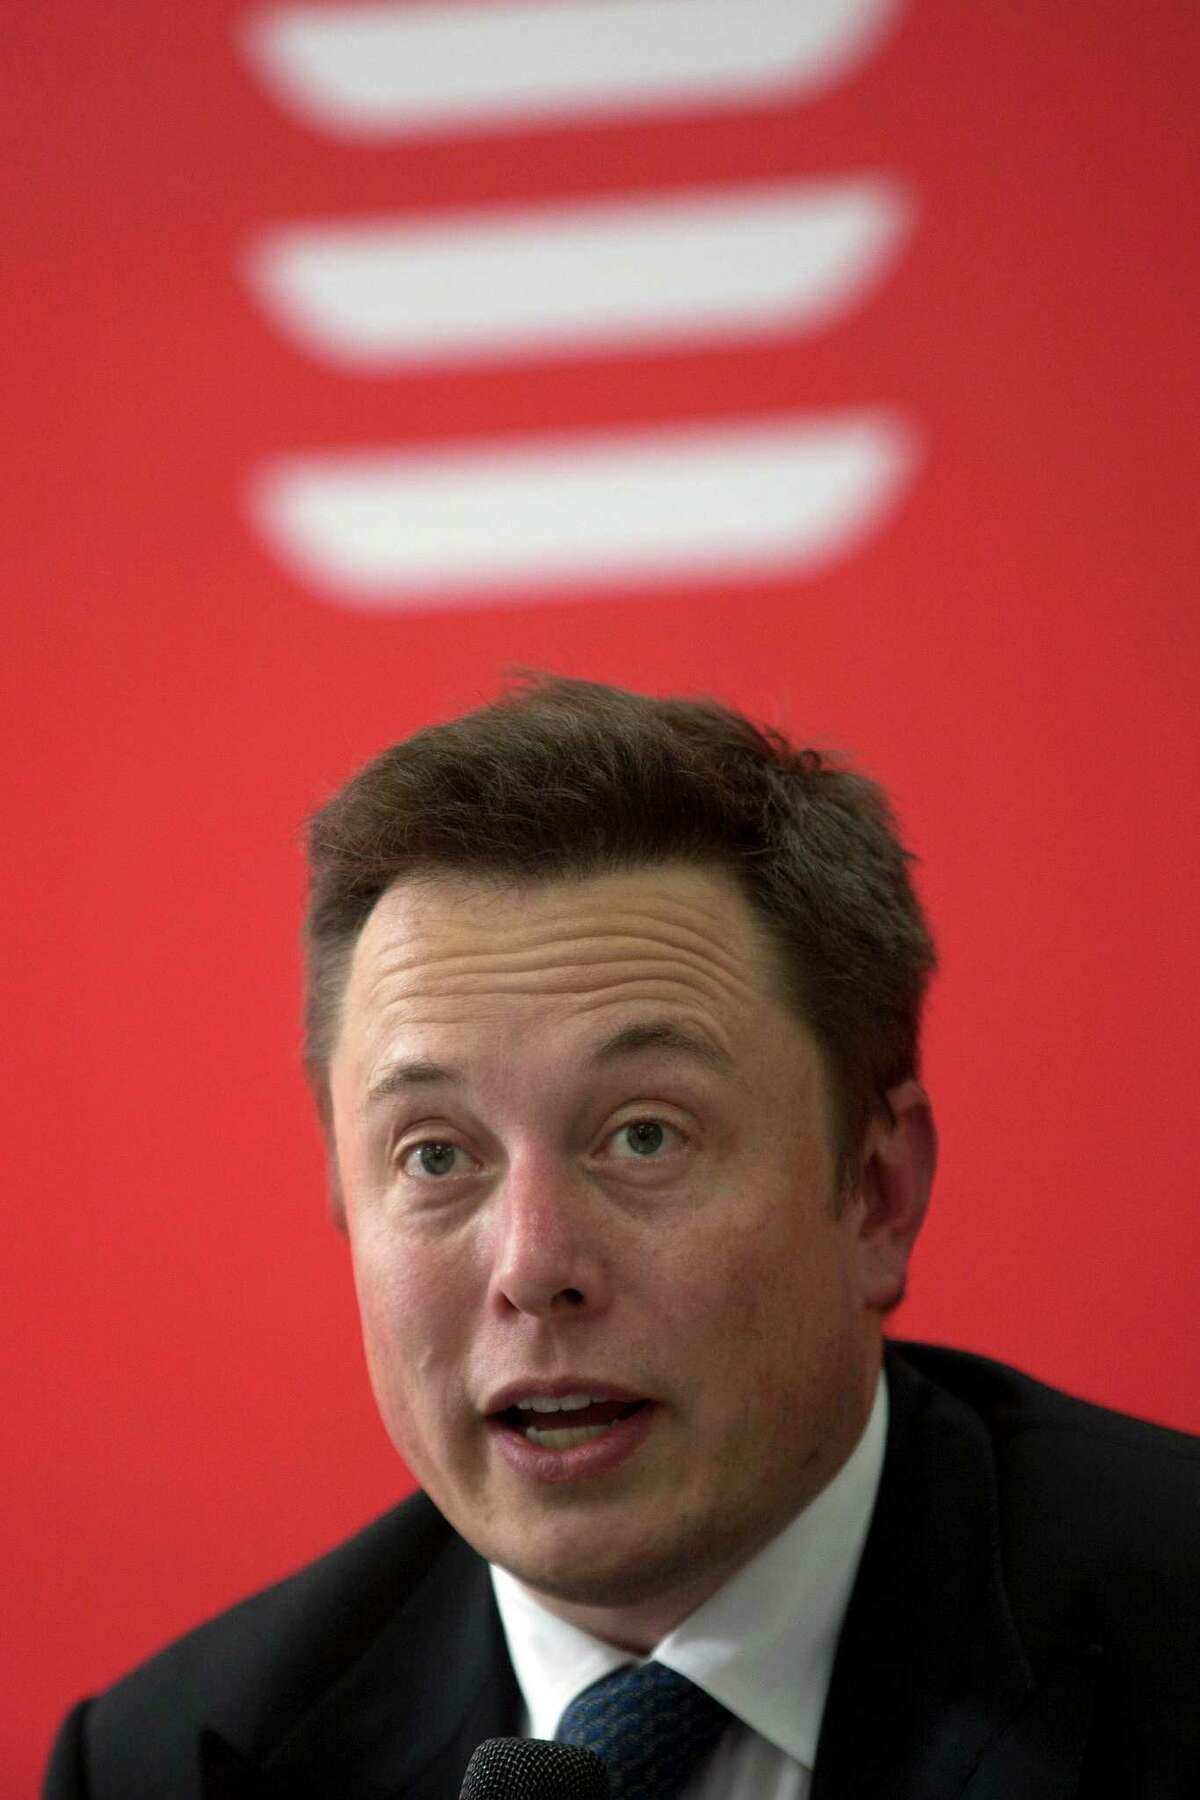 Tesla Motors Inc. CEO Elon Musk speaks before an event to deliver the first set of sedans to customers in Beijing, China, Tuesday, April 22, 2014. Tesla Motors delivered its first eight electric sedans to customers in China on Tuesday and Musk said the company will build a nationwide network of charging stations and service centers as fast as it can. (AP Photo/Ng Han Guan)